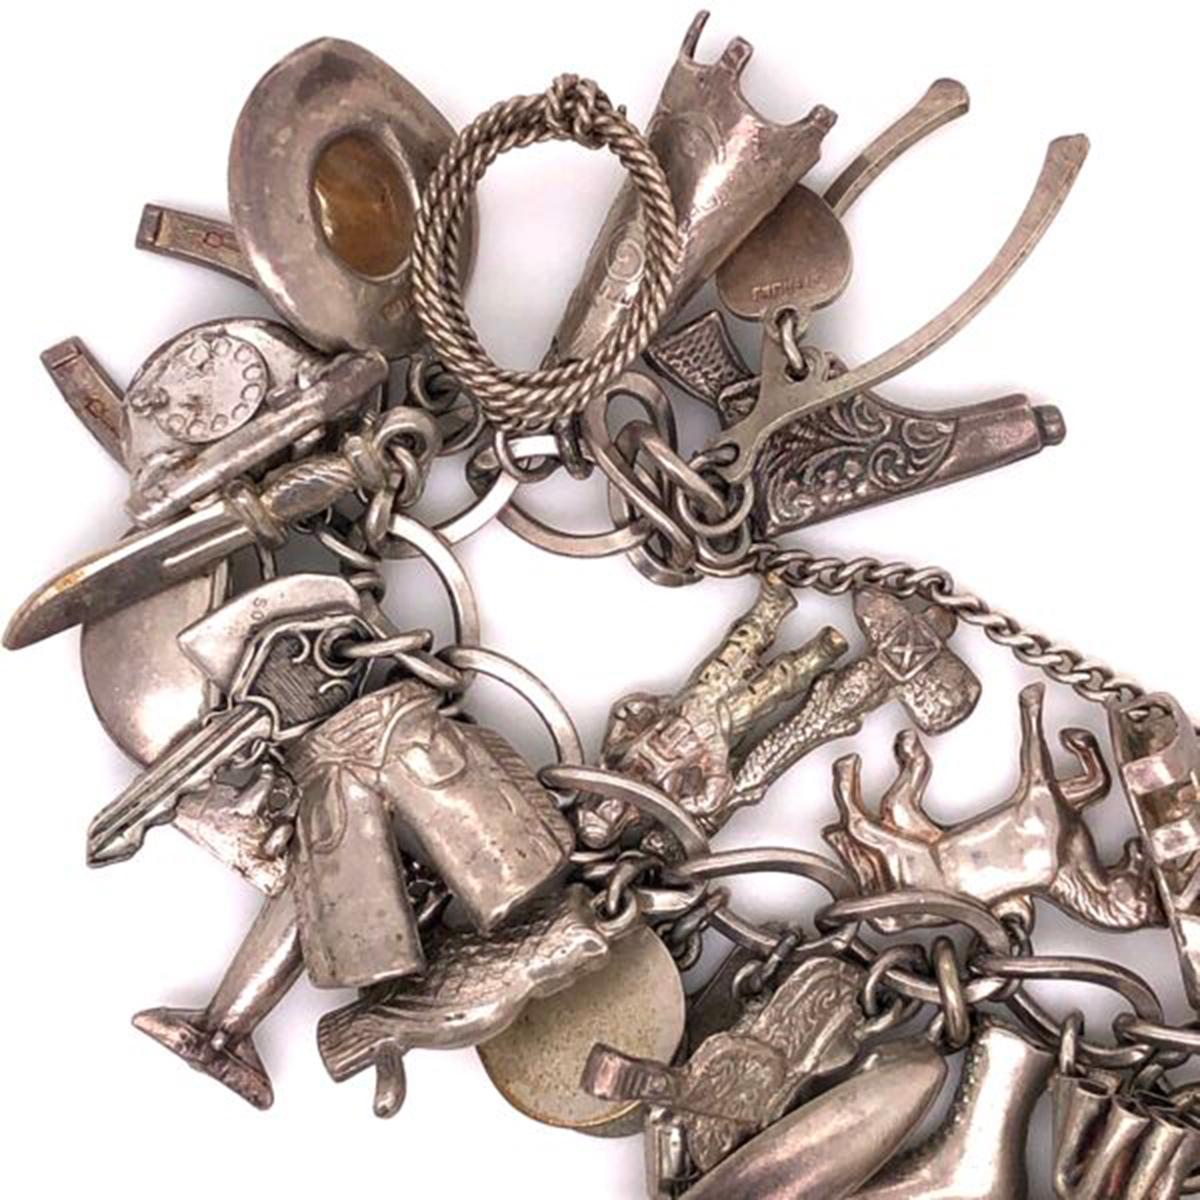 Fabulous 50 Piece Sterling Silver Charm Bracelet; approx. 7.5 inches long; Circa: 1970s. The bracelet is in excellent condition. A perfect complement to your outfit; to enjoy, truly a great conversation piece! Wow Power!
